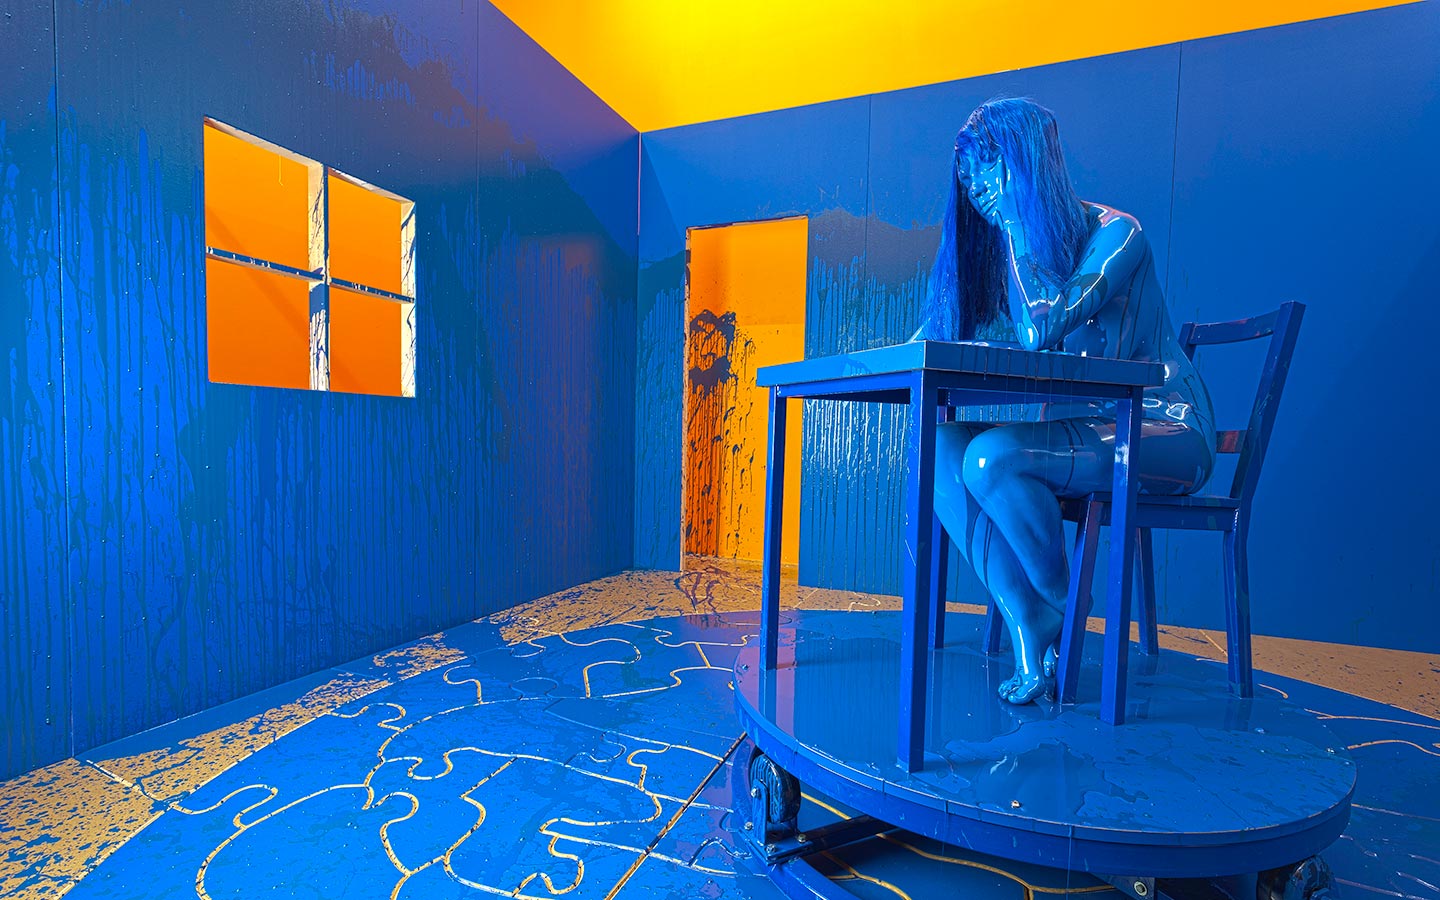 Blue Room by Richard Jackson at the Rubell Museum